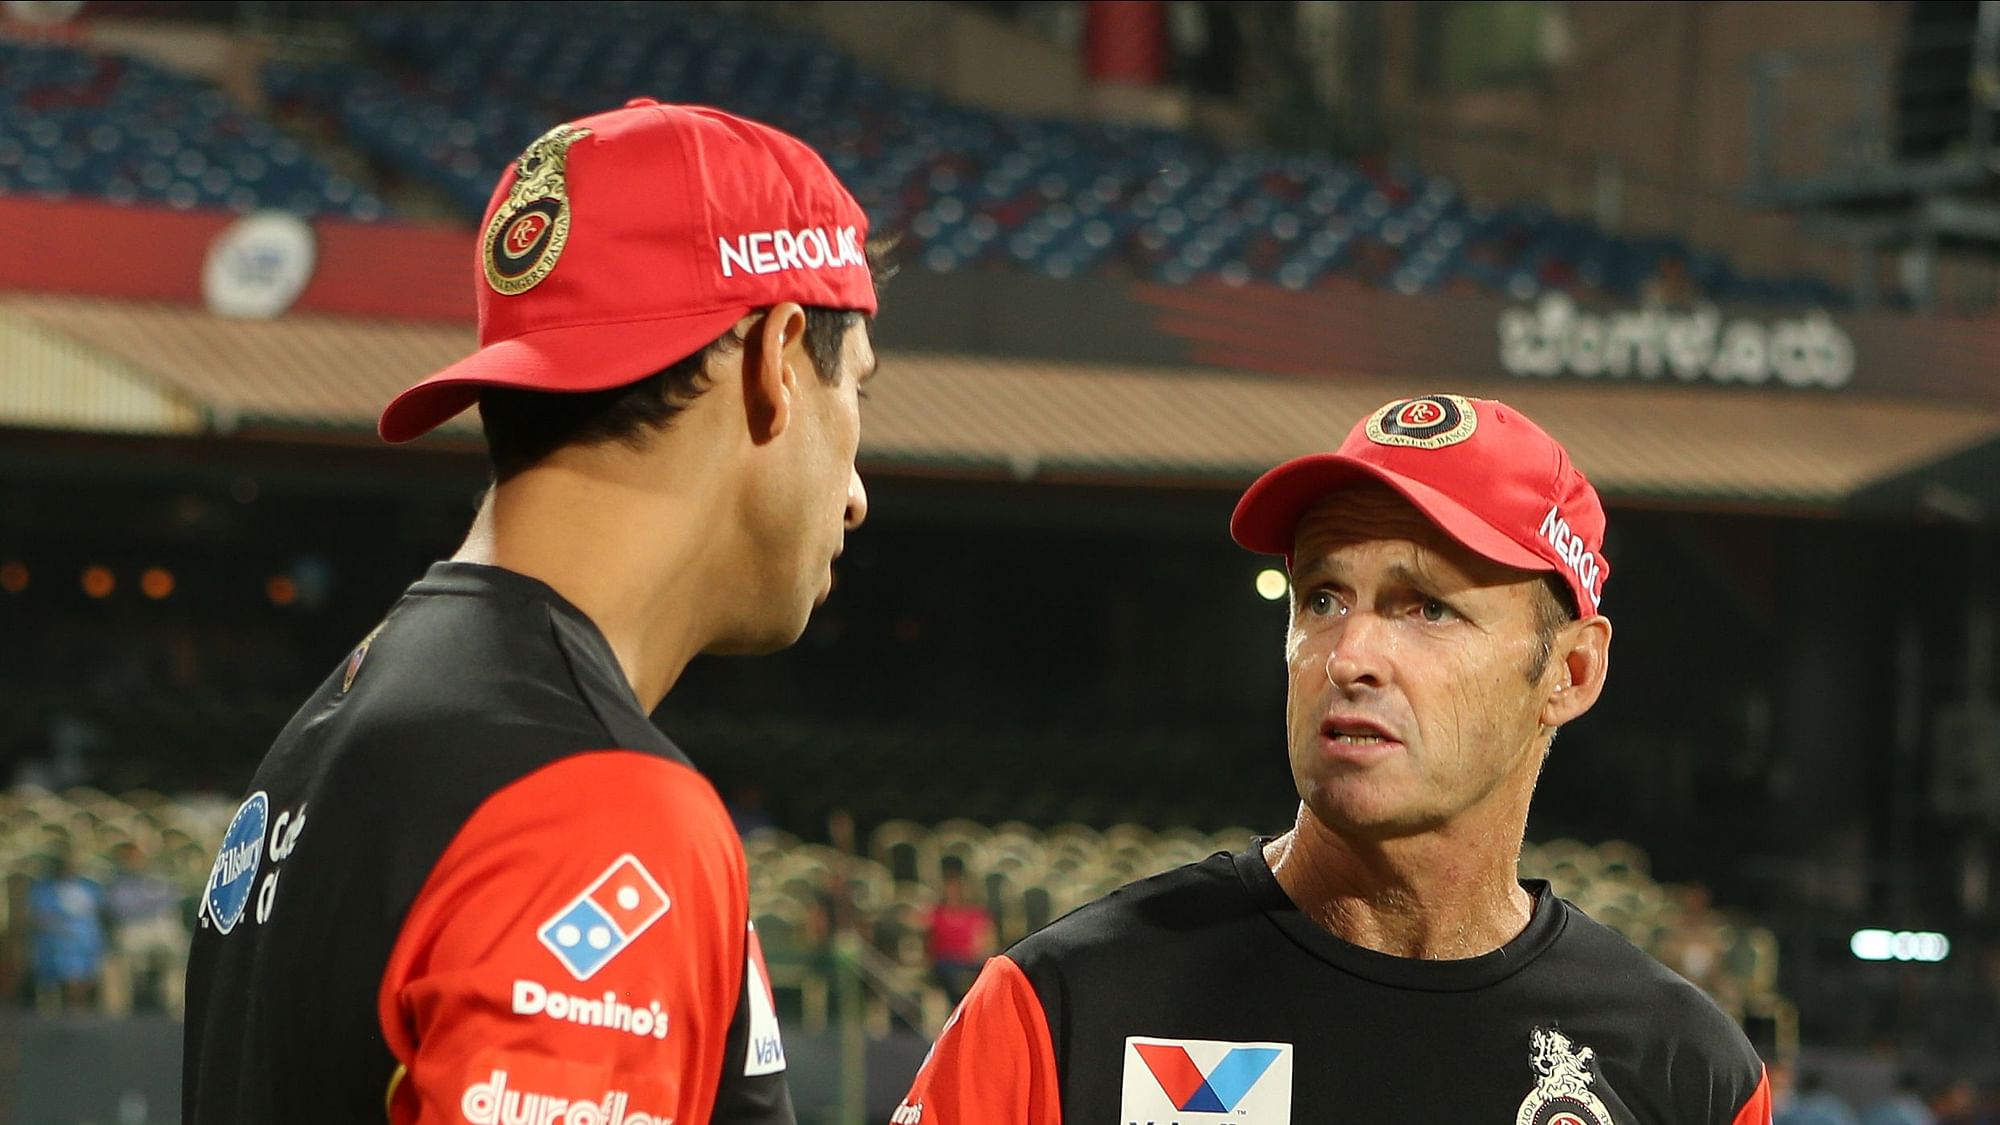 The Royal Challengers Bangalore have replaced Gary Kirsten with Simon Katich as their head coach.